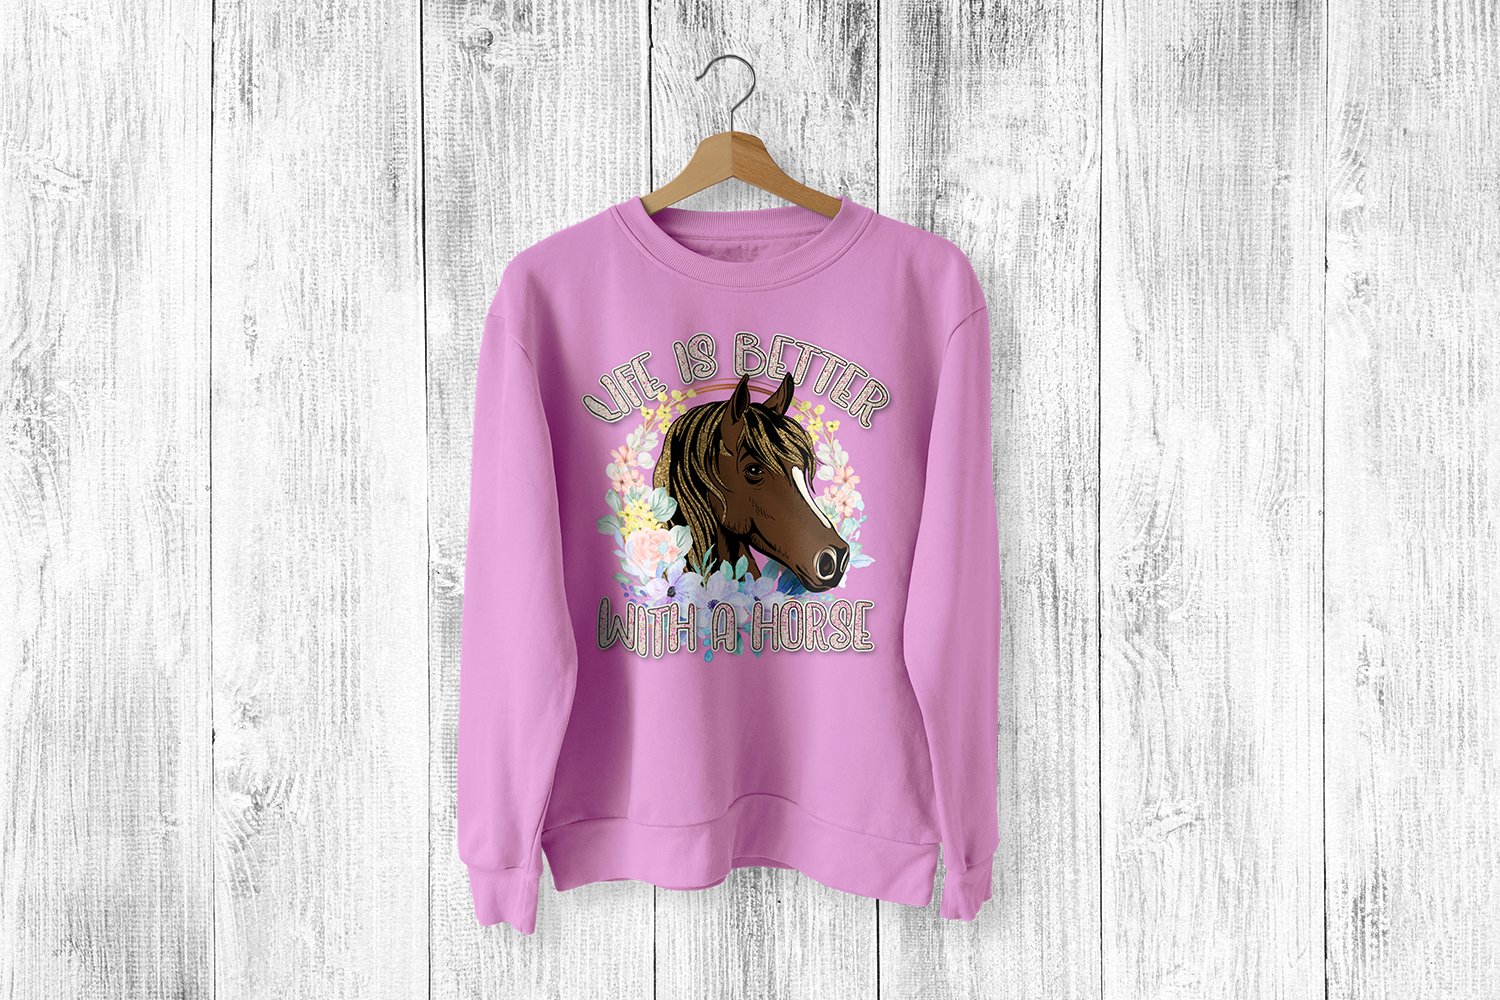 Pink sweatshirt with a horse on it.